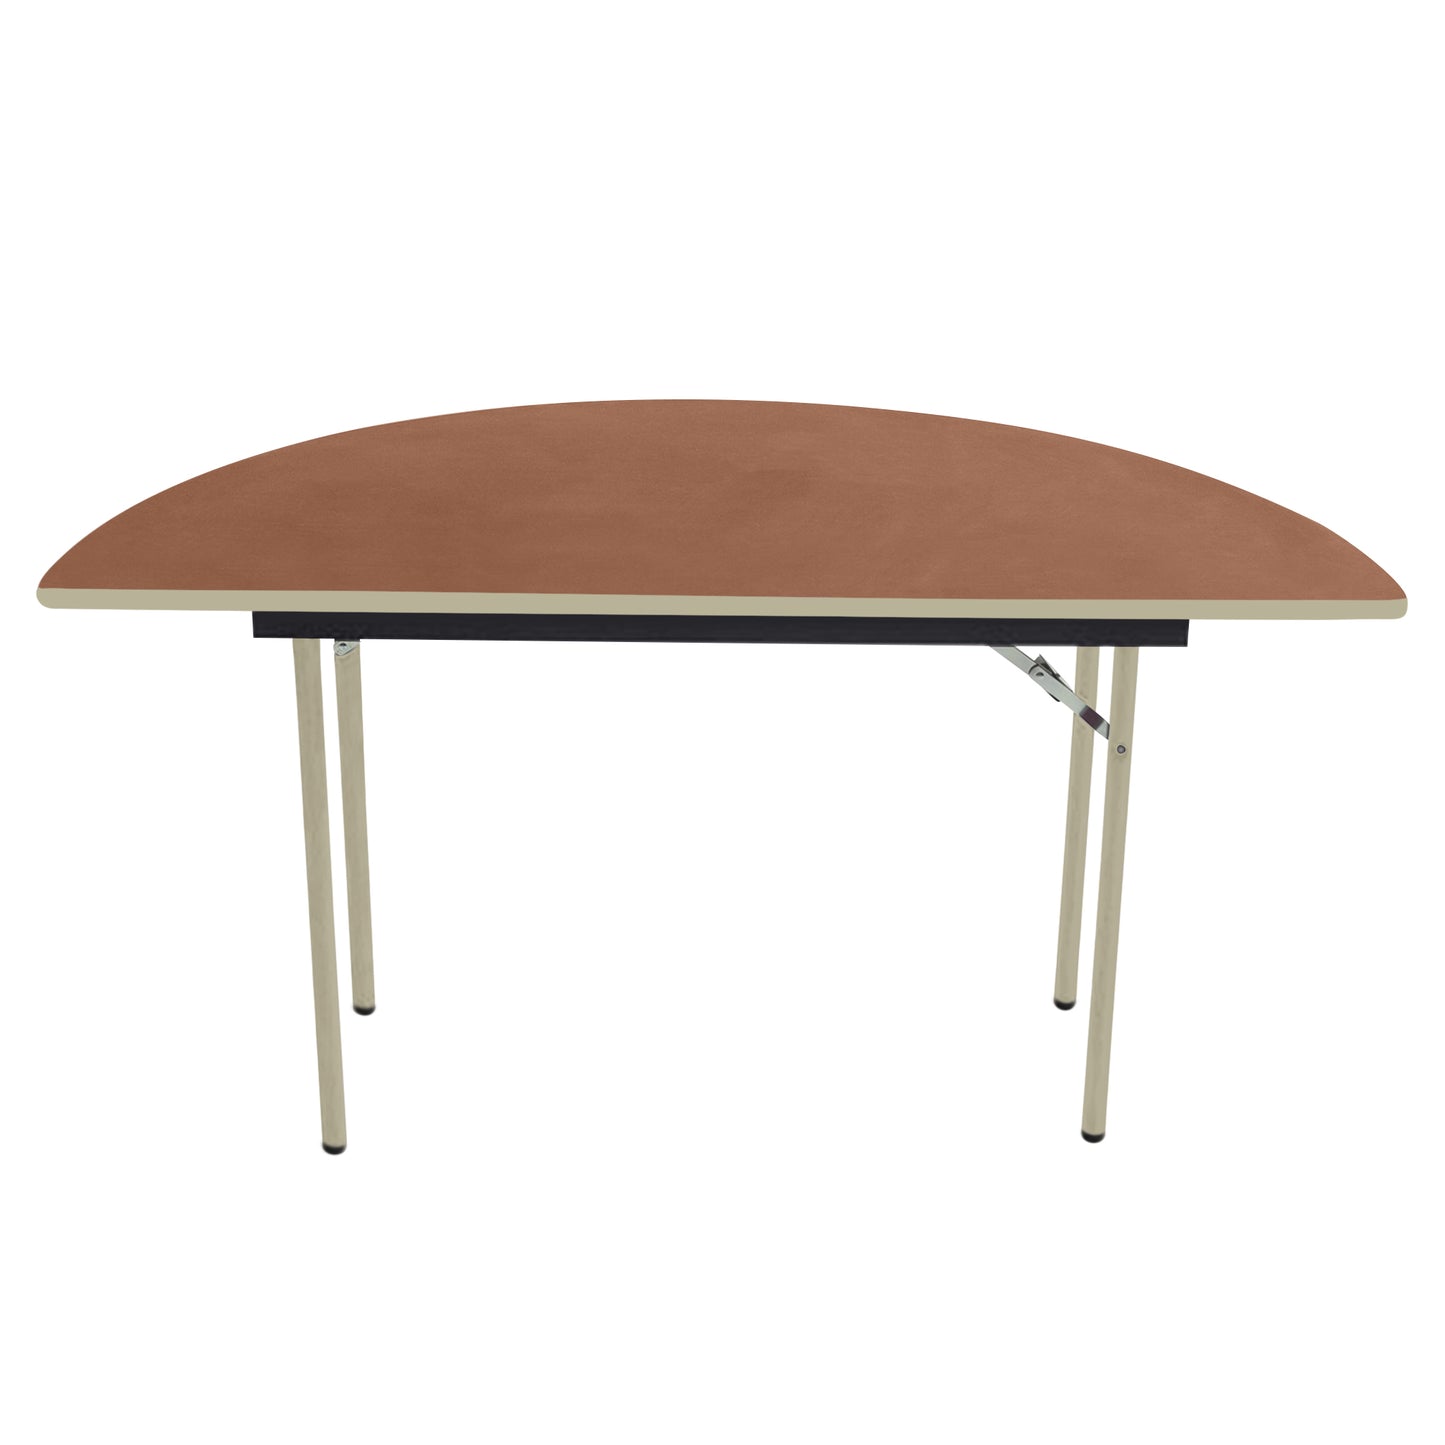 AmTab Folding Table - Plywood Stained and Sealed - Vinyl T-Molding Edge - Half Round - Half 60" Diameter x 29"H  (AmTab AMT-HR60PM)